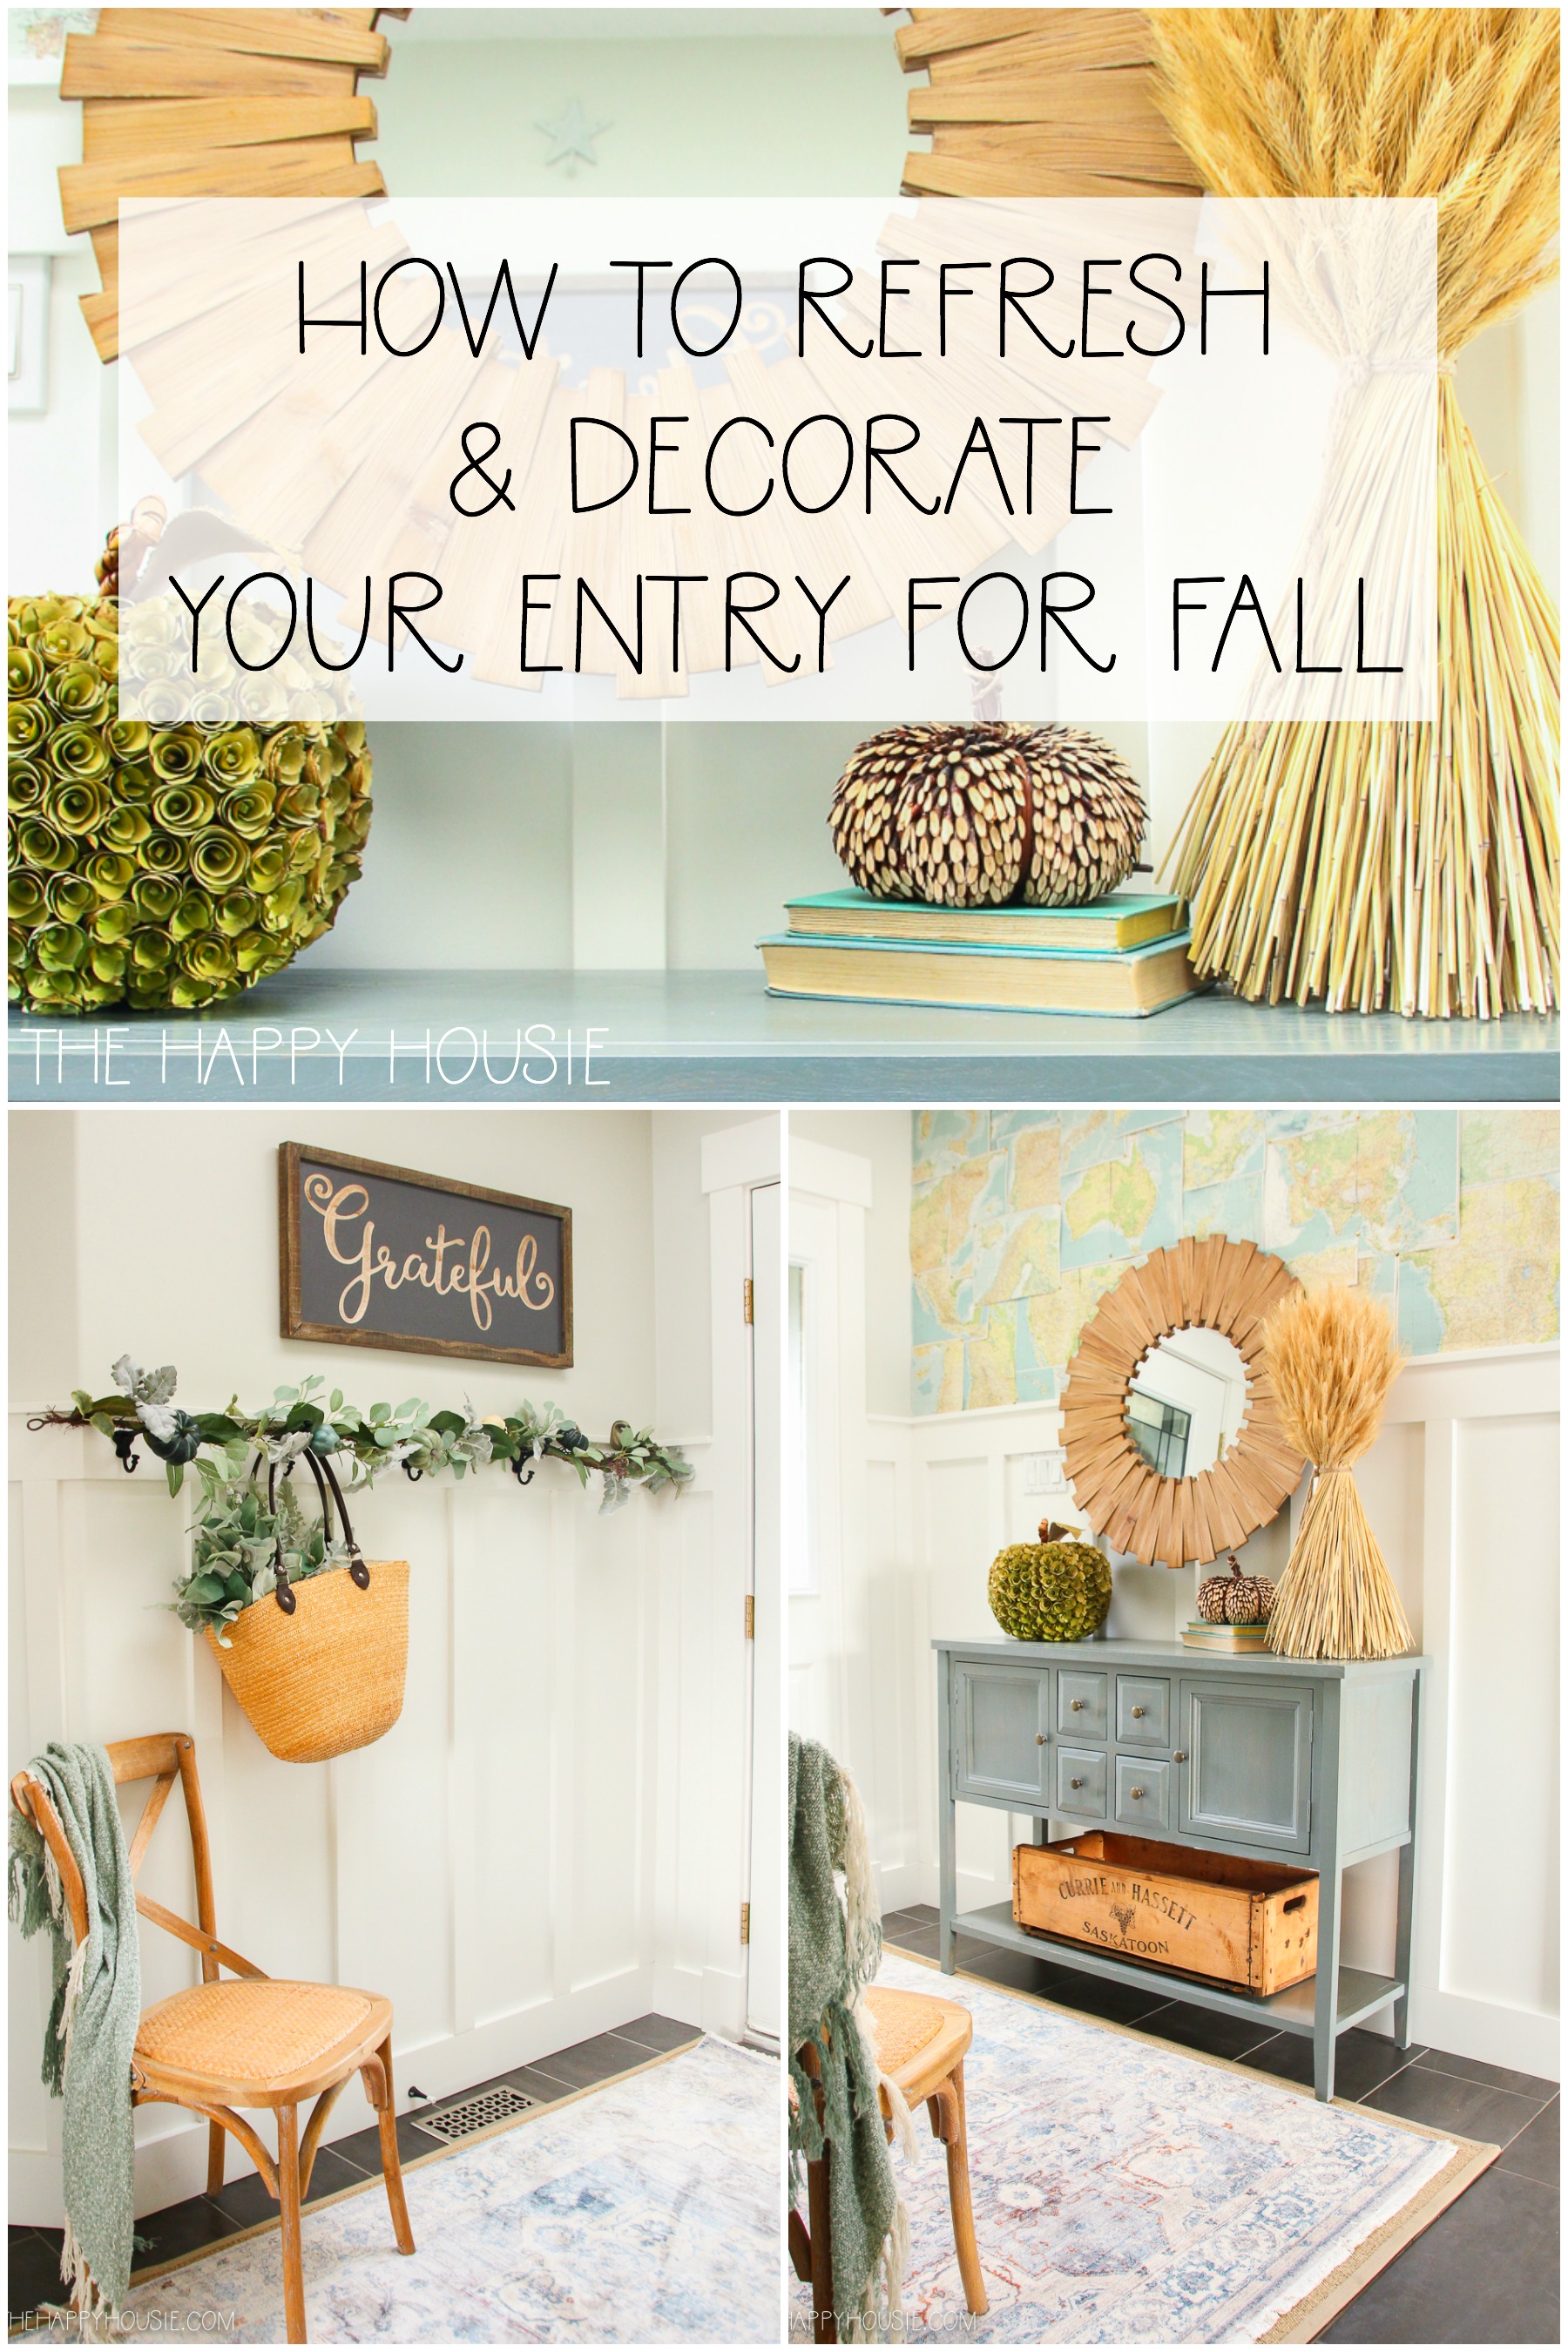 How to refresh and decorate your entry for fall graphic.